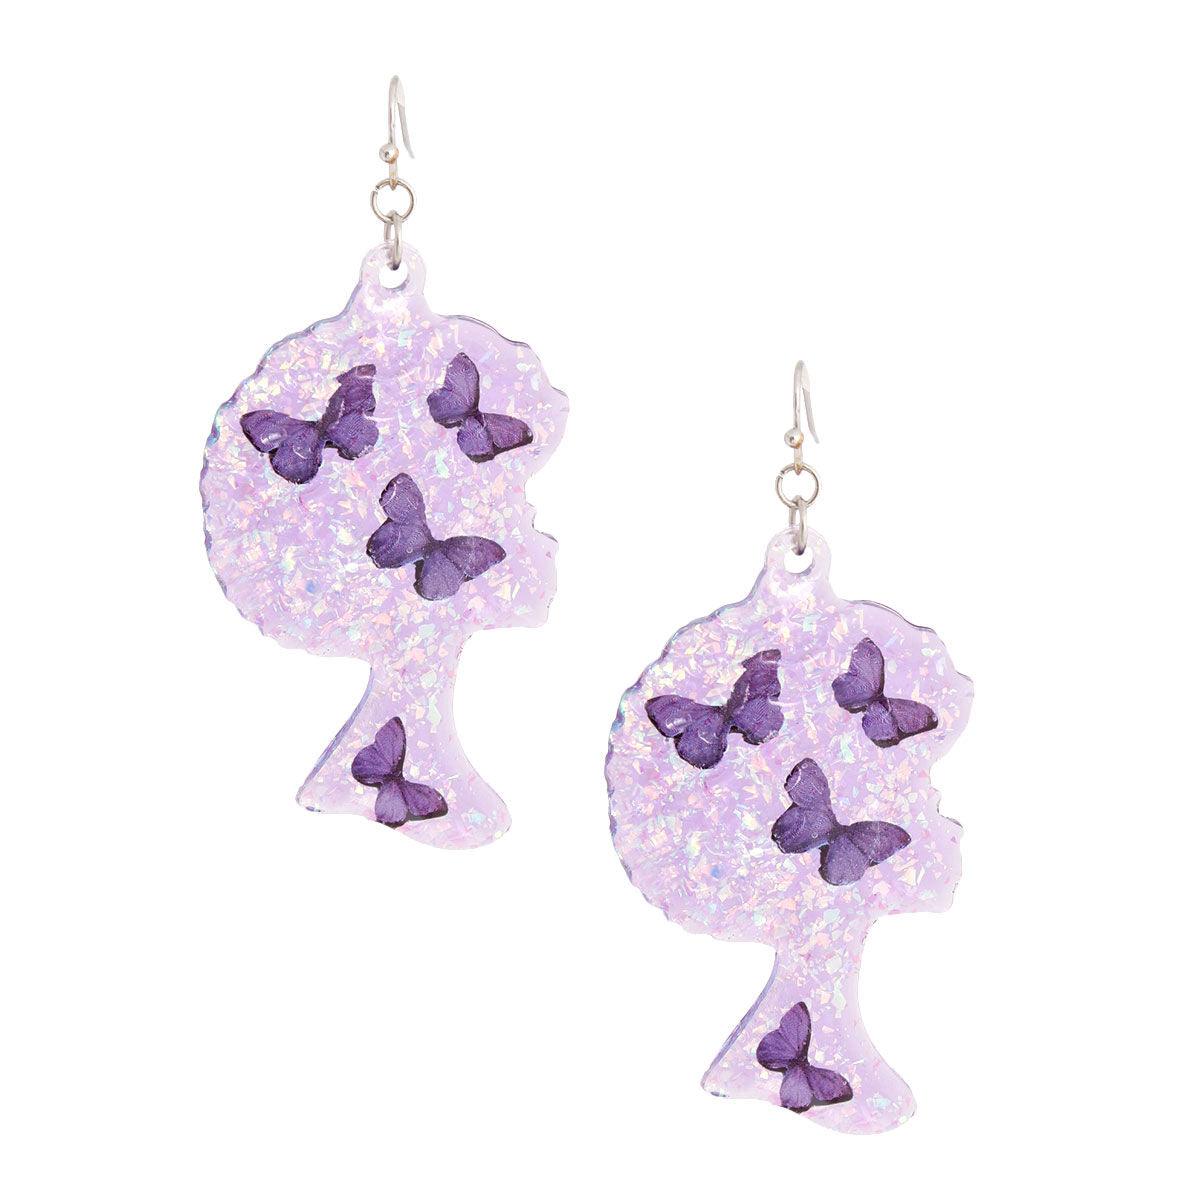 Get Your Purple Afro Butterfly Earrings Here - Perfect Accessory!